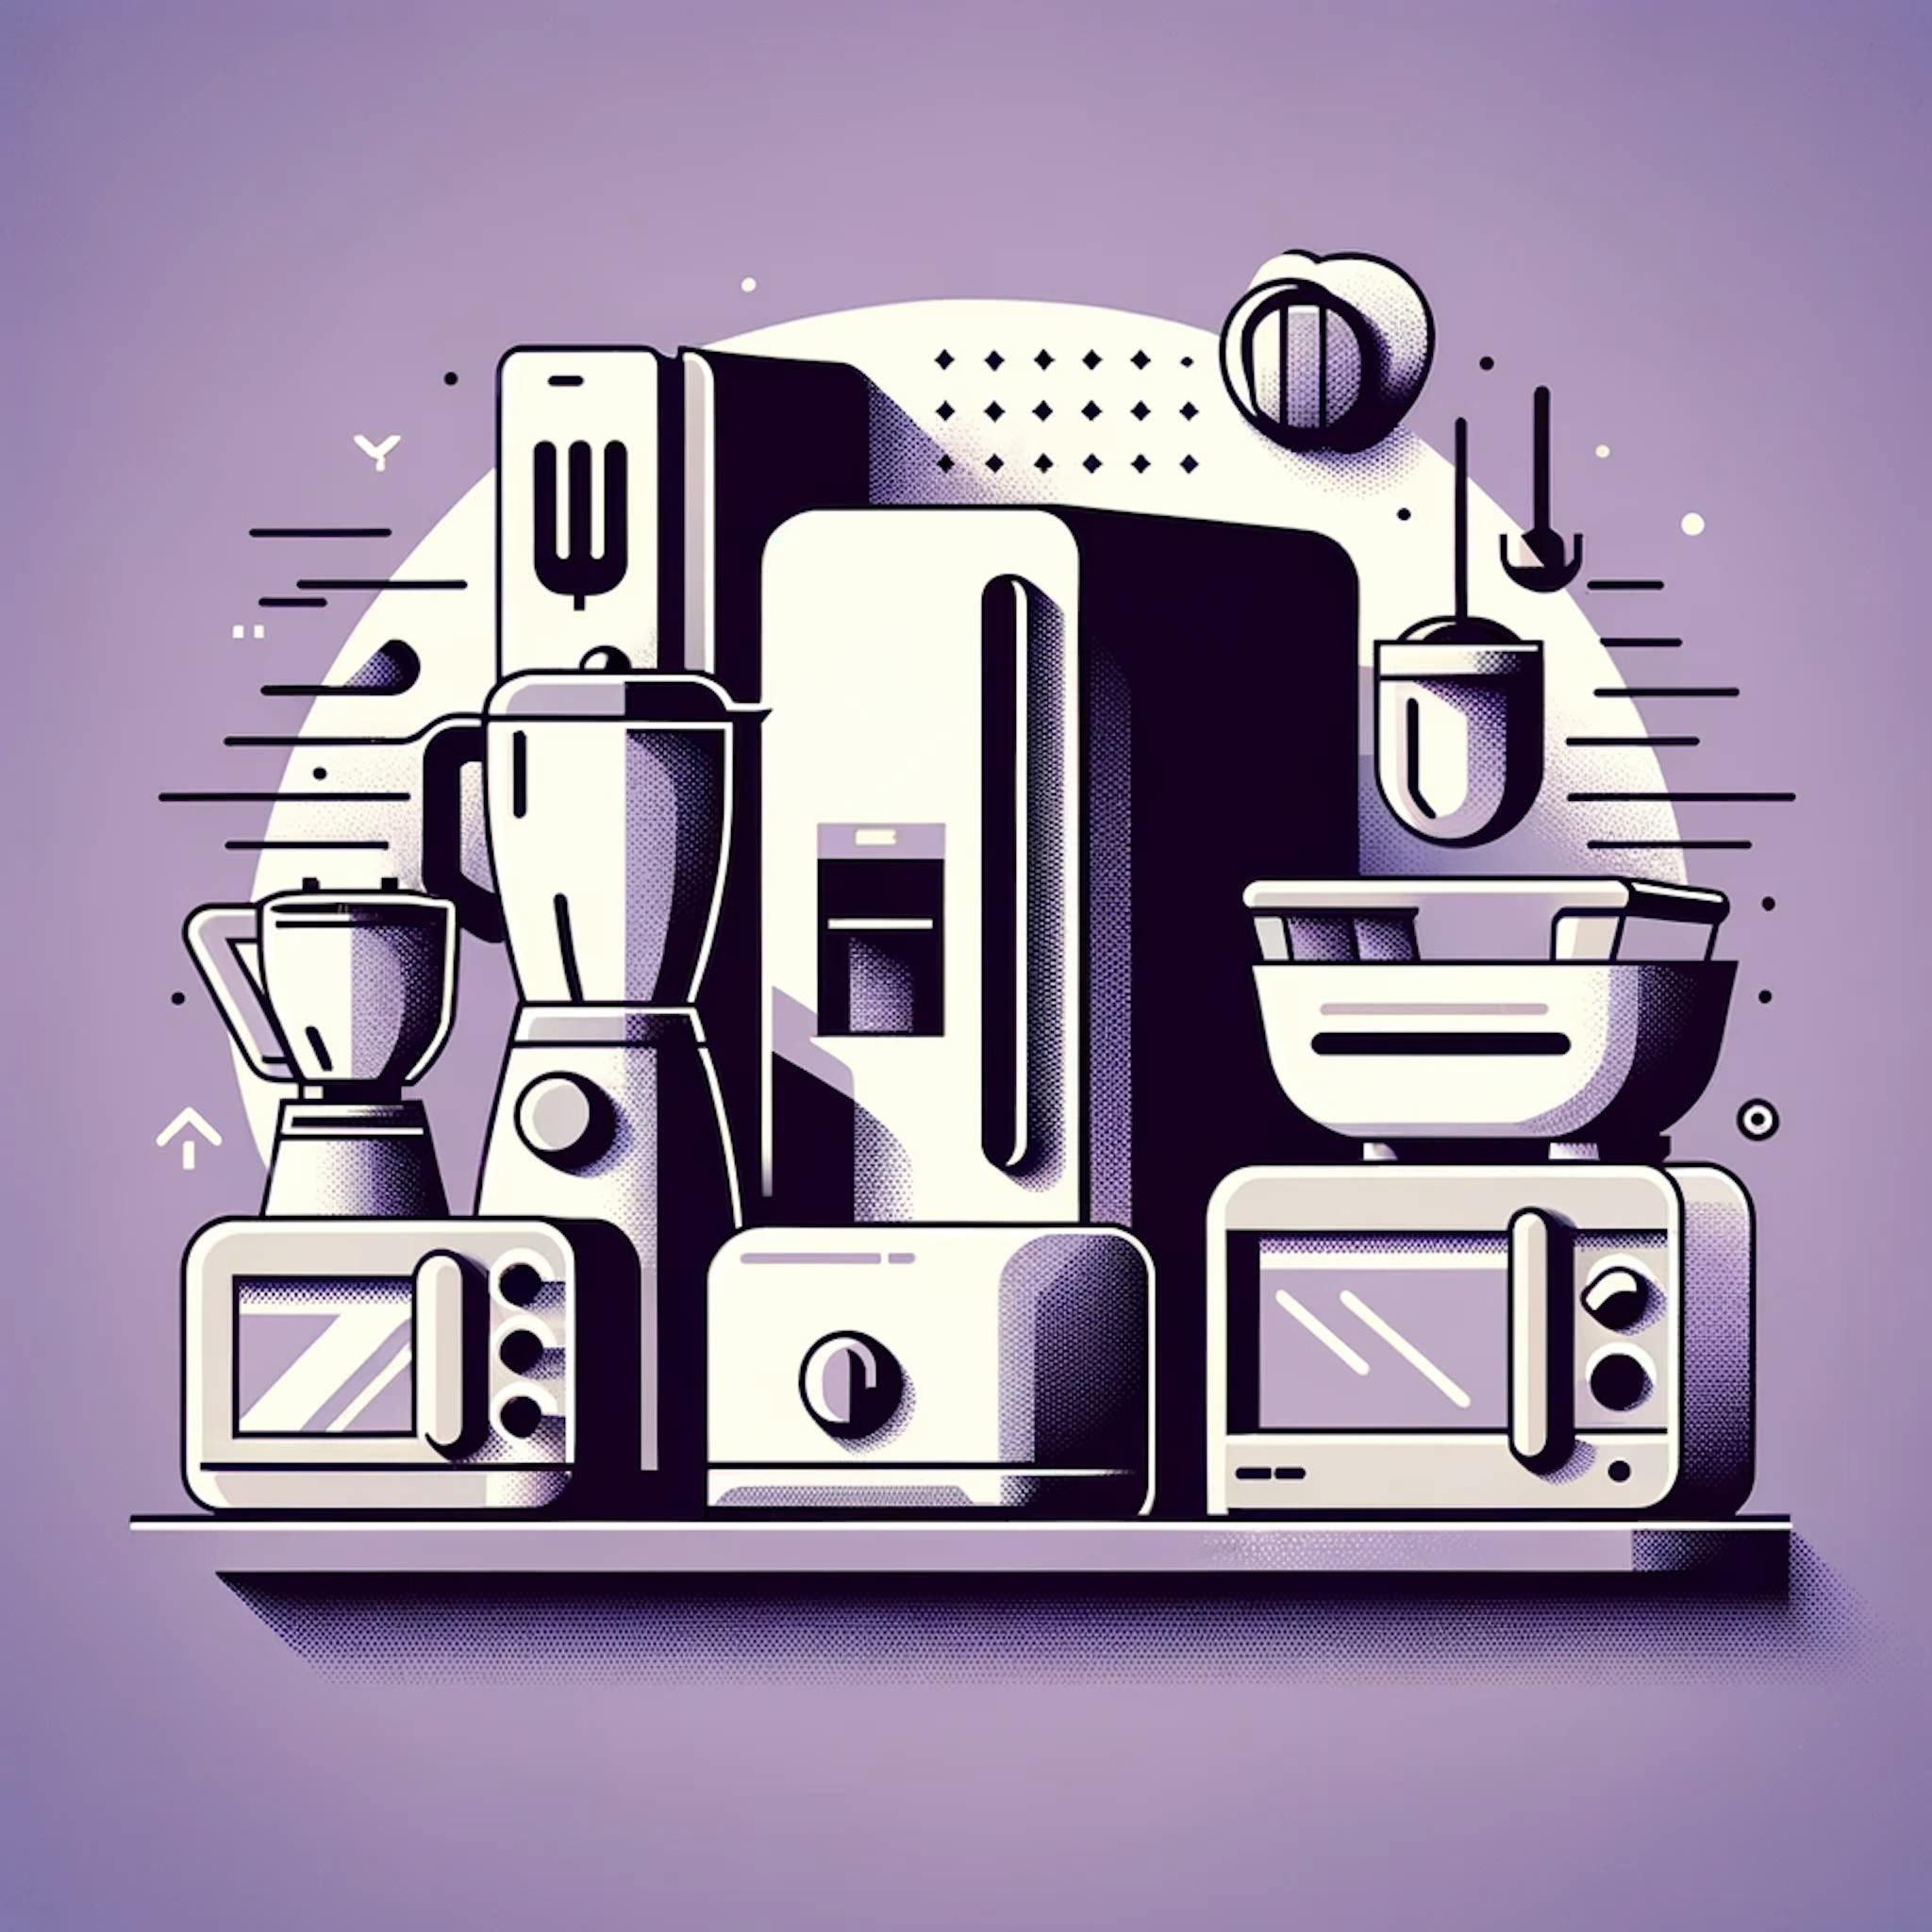 icons of various kitchen appliances like a blender, a toaster, a microwave, and a refrigerator